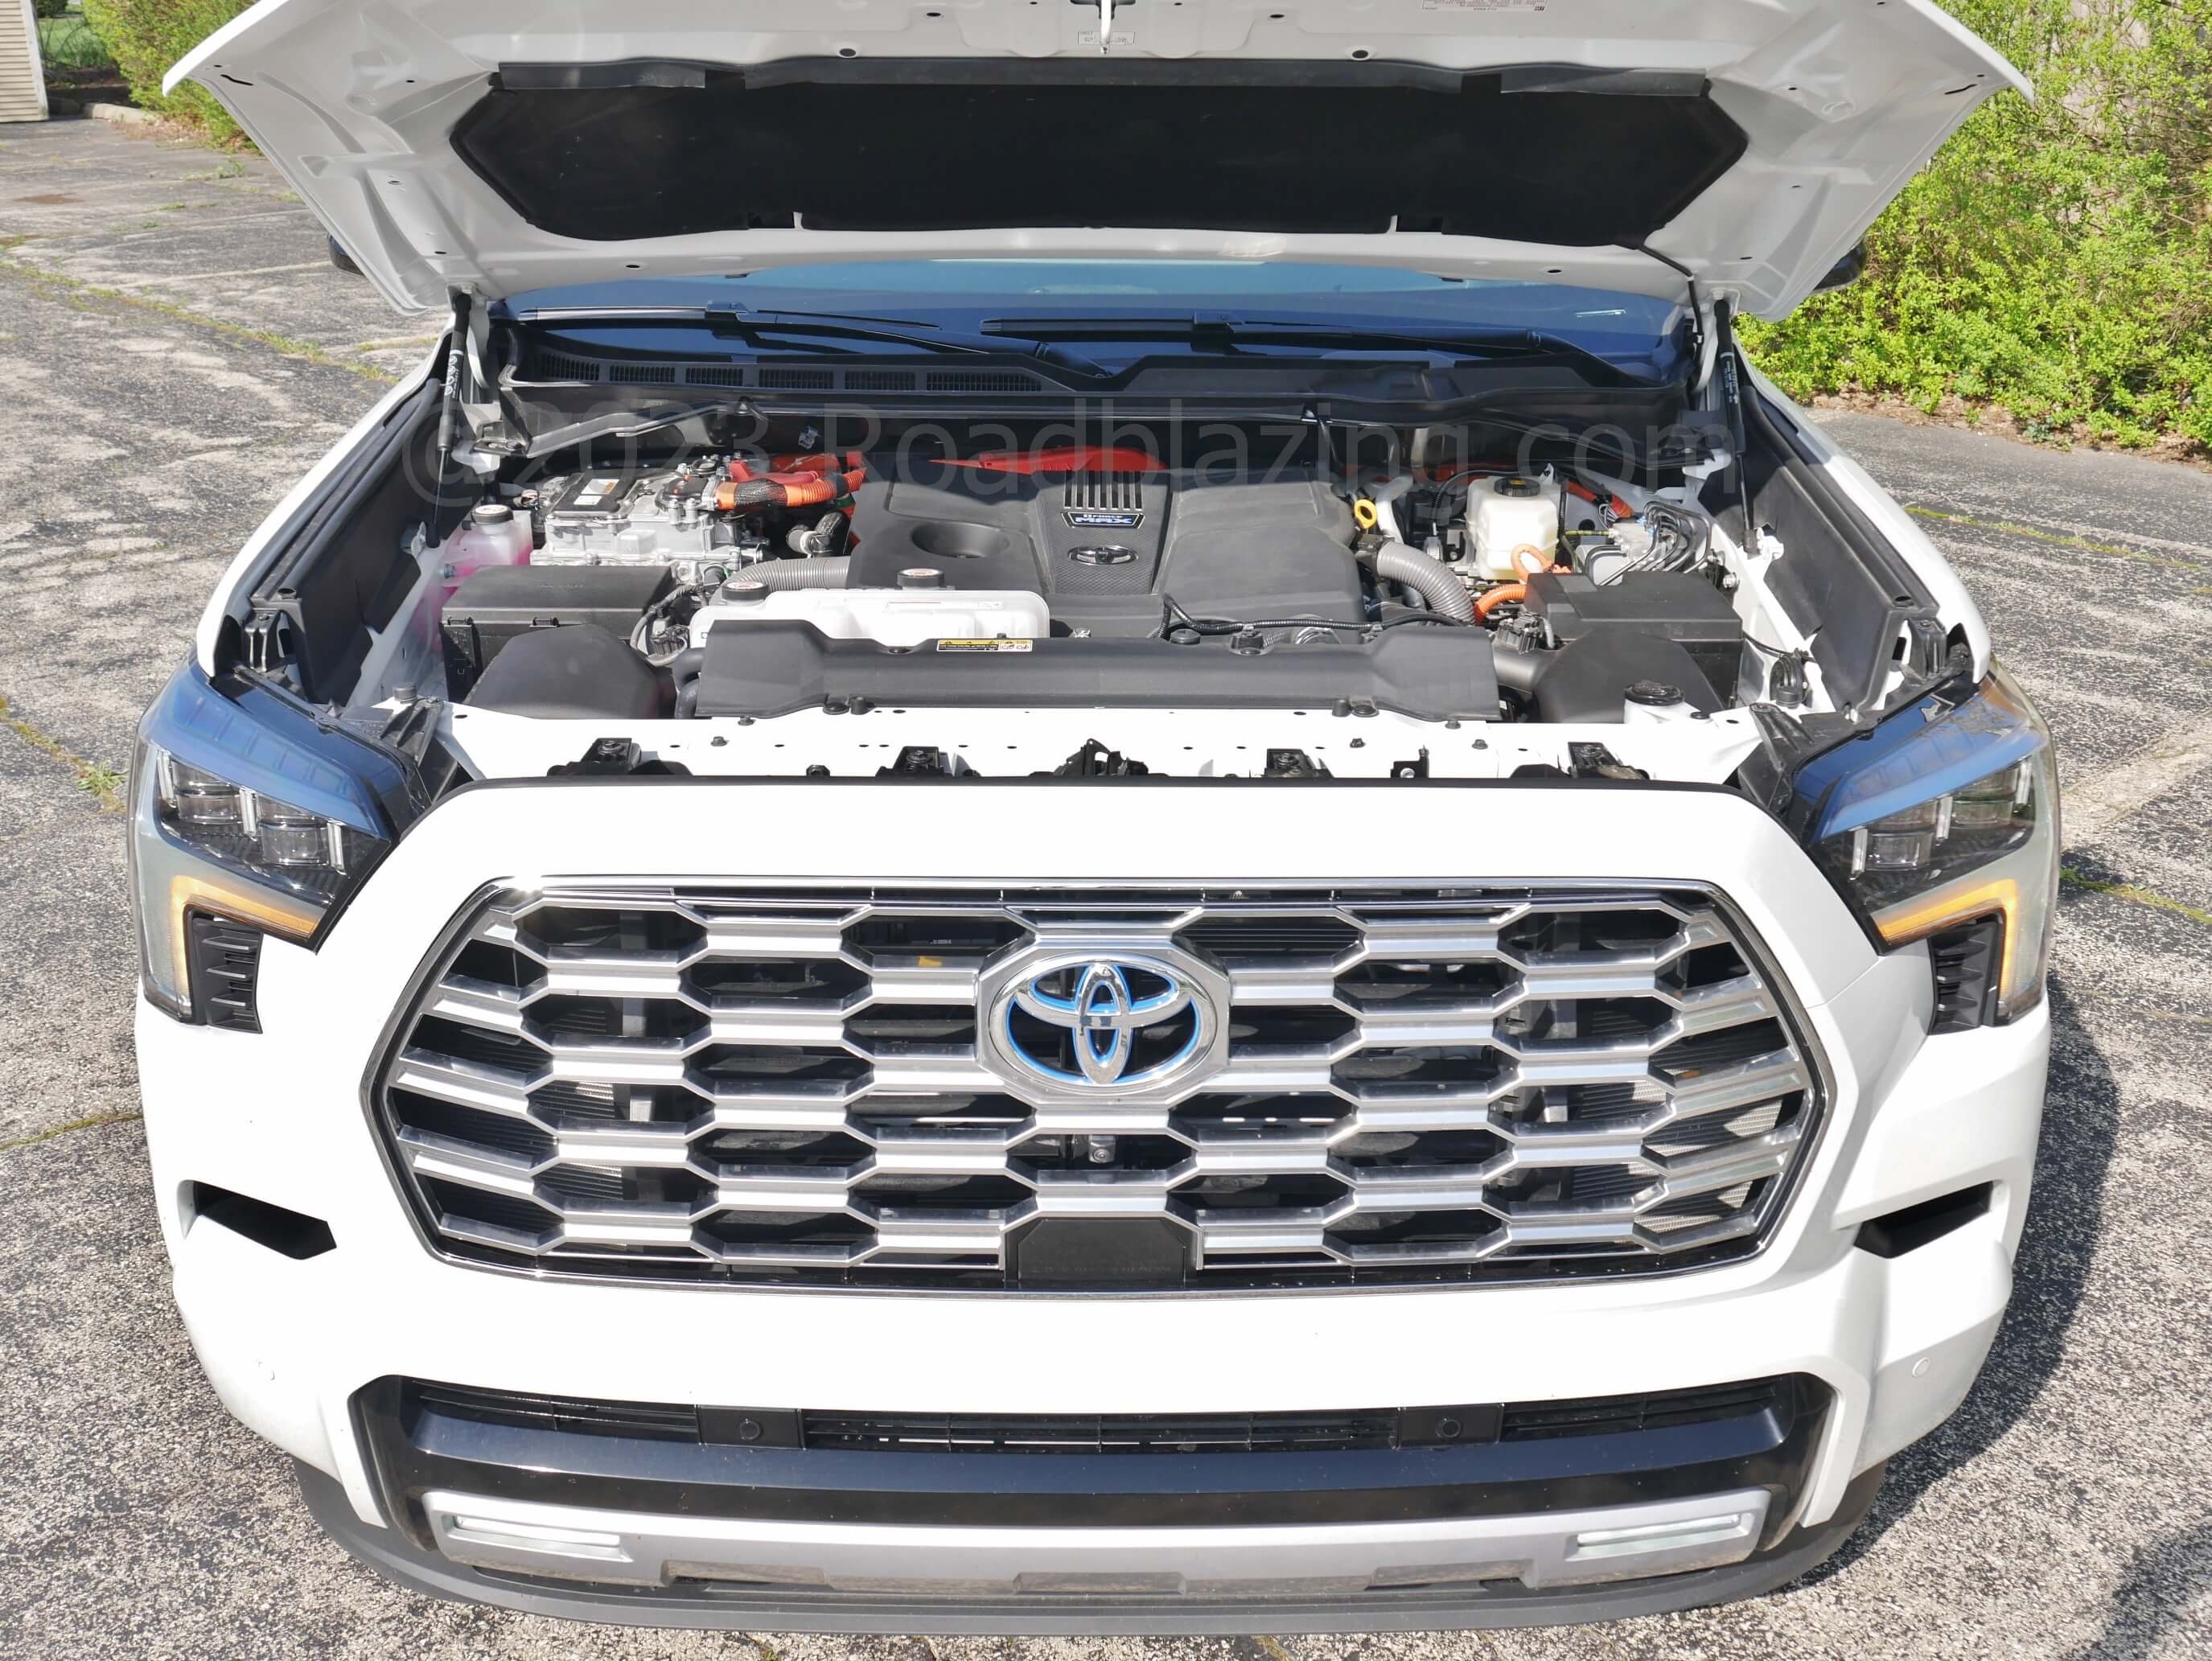 2023 Toyota Sequoia Capstone 4x4: standard mild hybrid twin turbo V-6 mated to 10-speed automatic + terrain management transfer case four-wheel drive